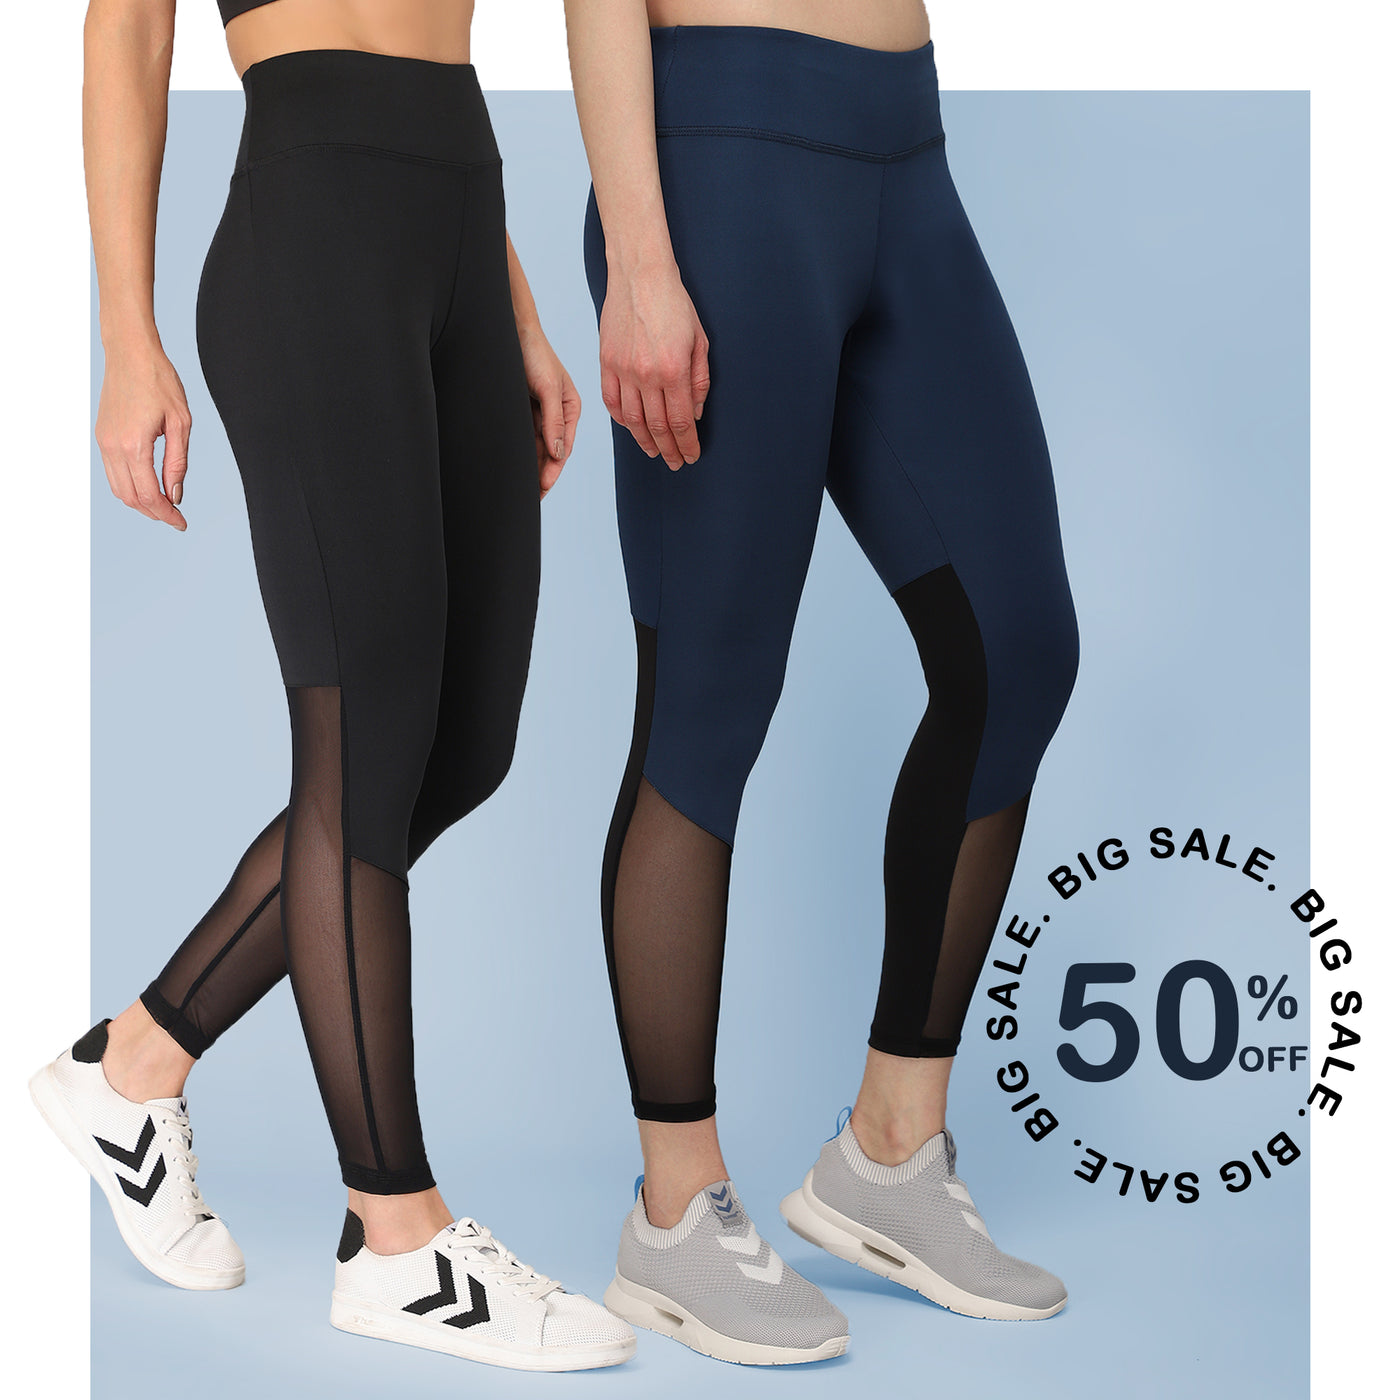 Combo of two High Waist Breathable Mesh Tights - Black & Blue